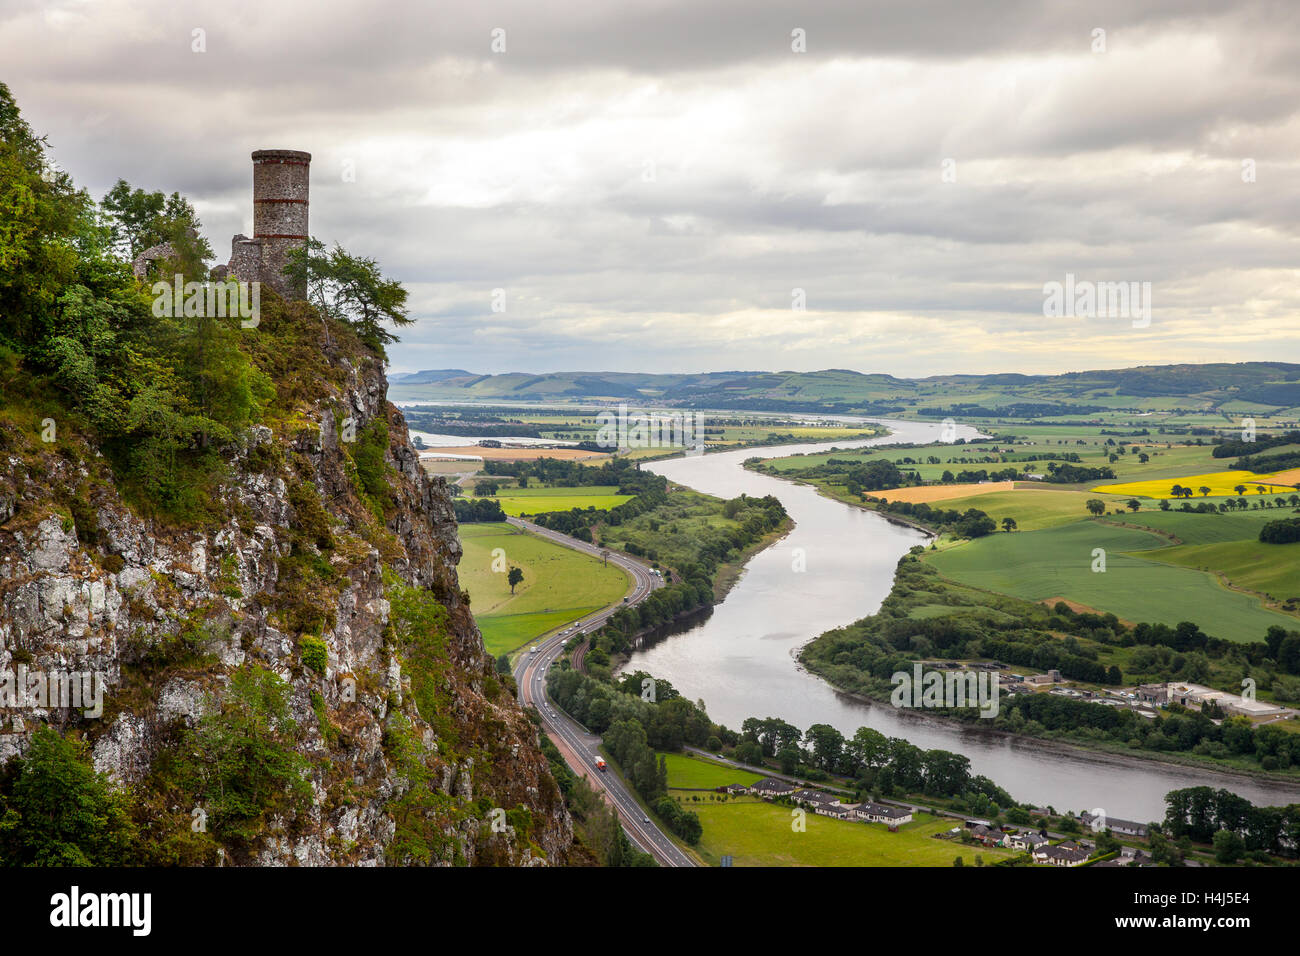 Eighteenth century Folly or Kinnoull Tower Hill, Binn Tower on clifftop escarpment above the River Tay and the A93.  Scottish landmarks, near Perth, Perthshire - Scotland, UK Stock Photo